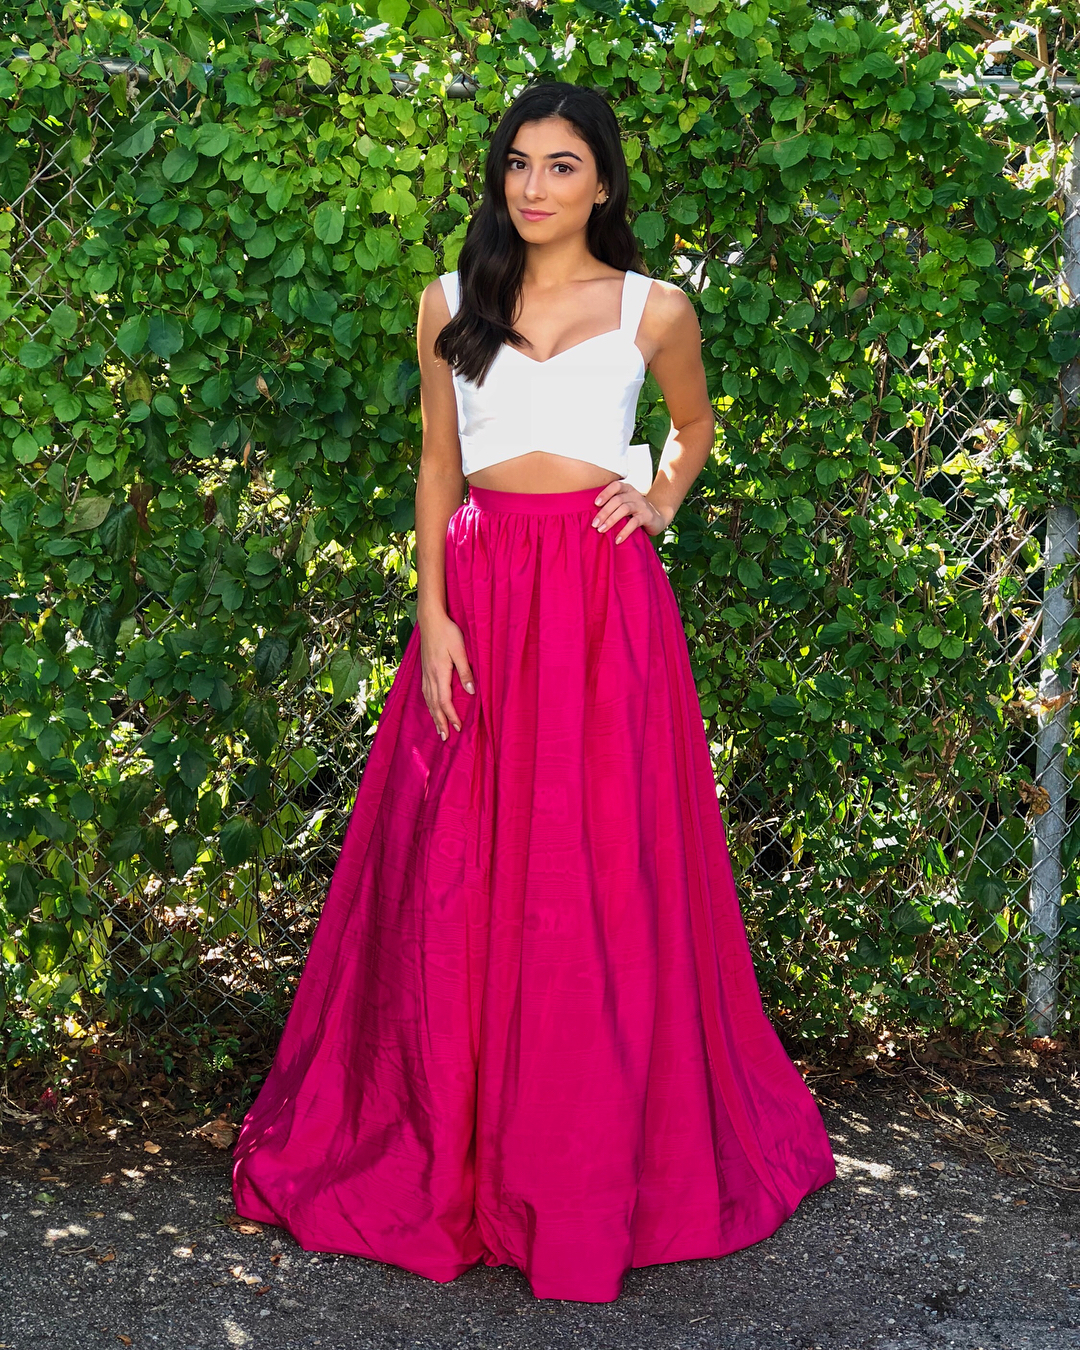 White / Fuchsia Sweetheart Two Piece Prom Dress,A Line Formal Gown With Cut Out Back,Bow